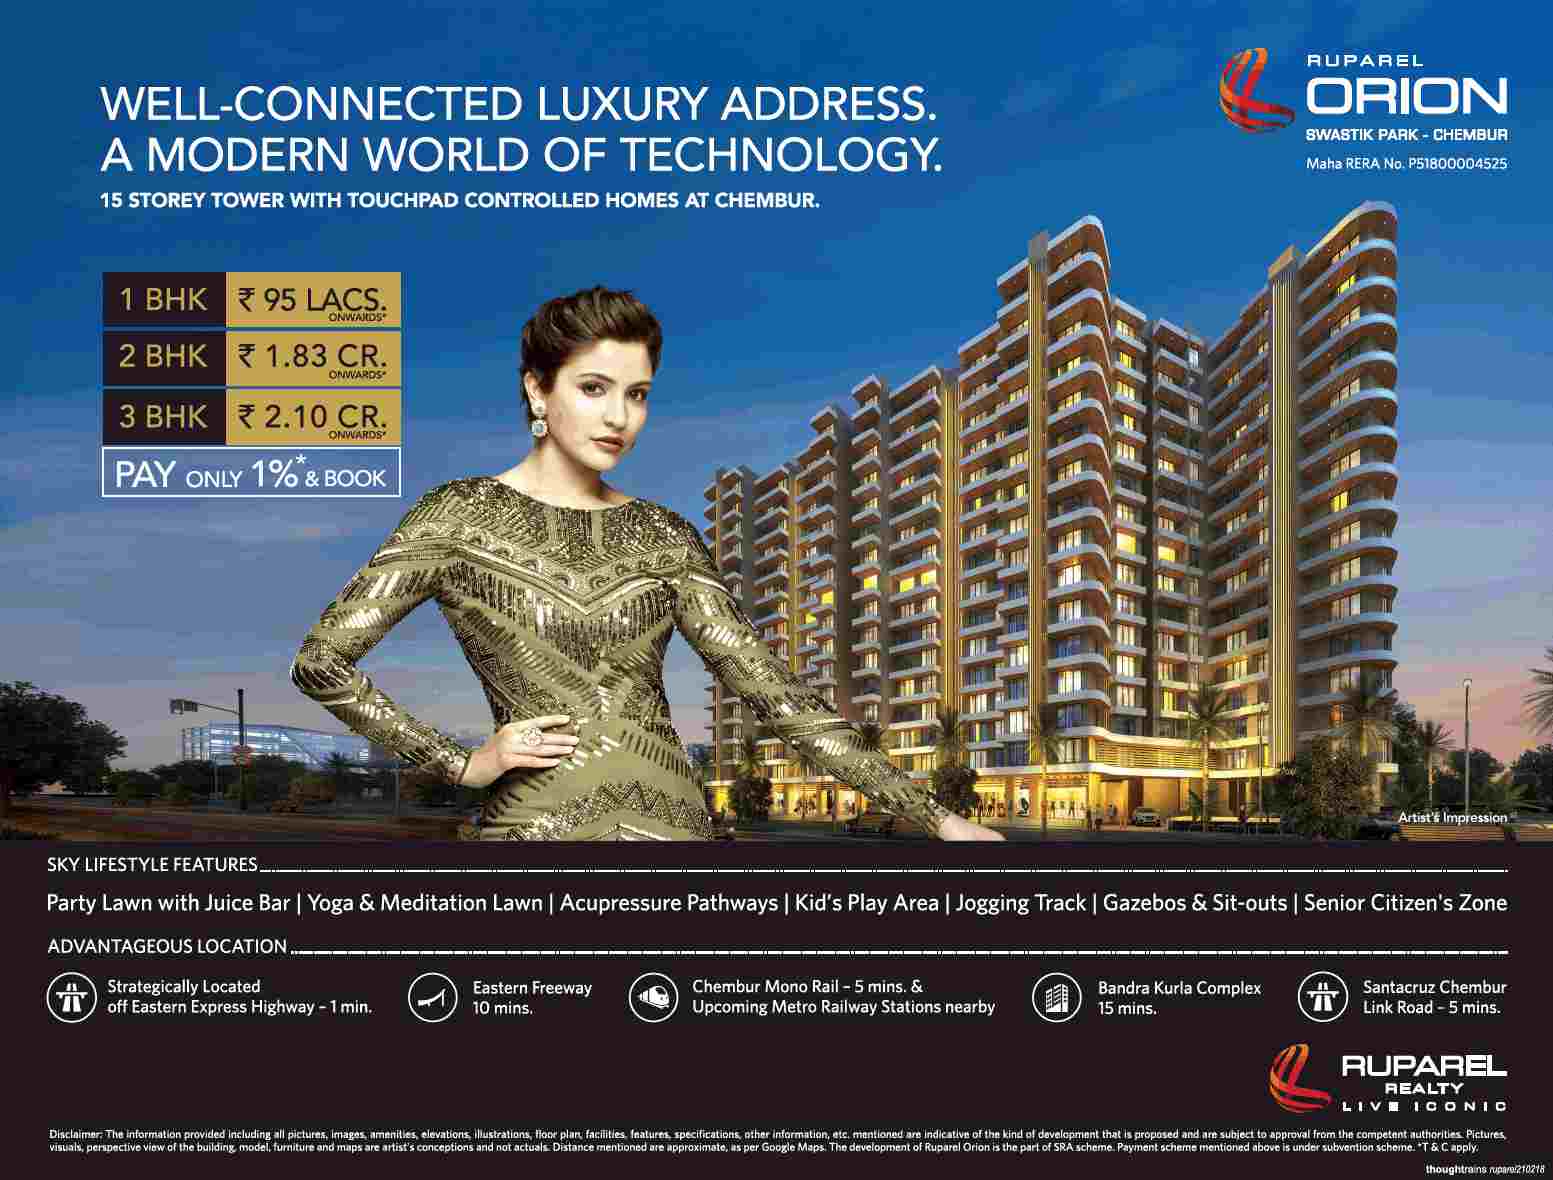 Pay only 1% & book your home at Ruparel Orion in Mumbai Update